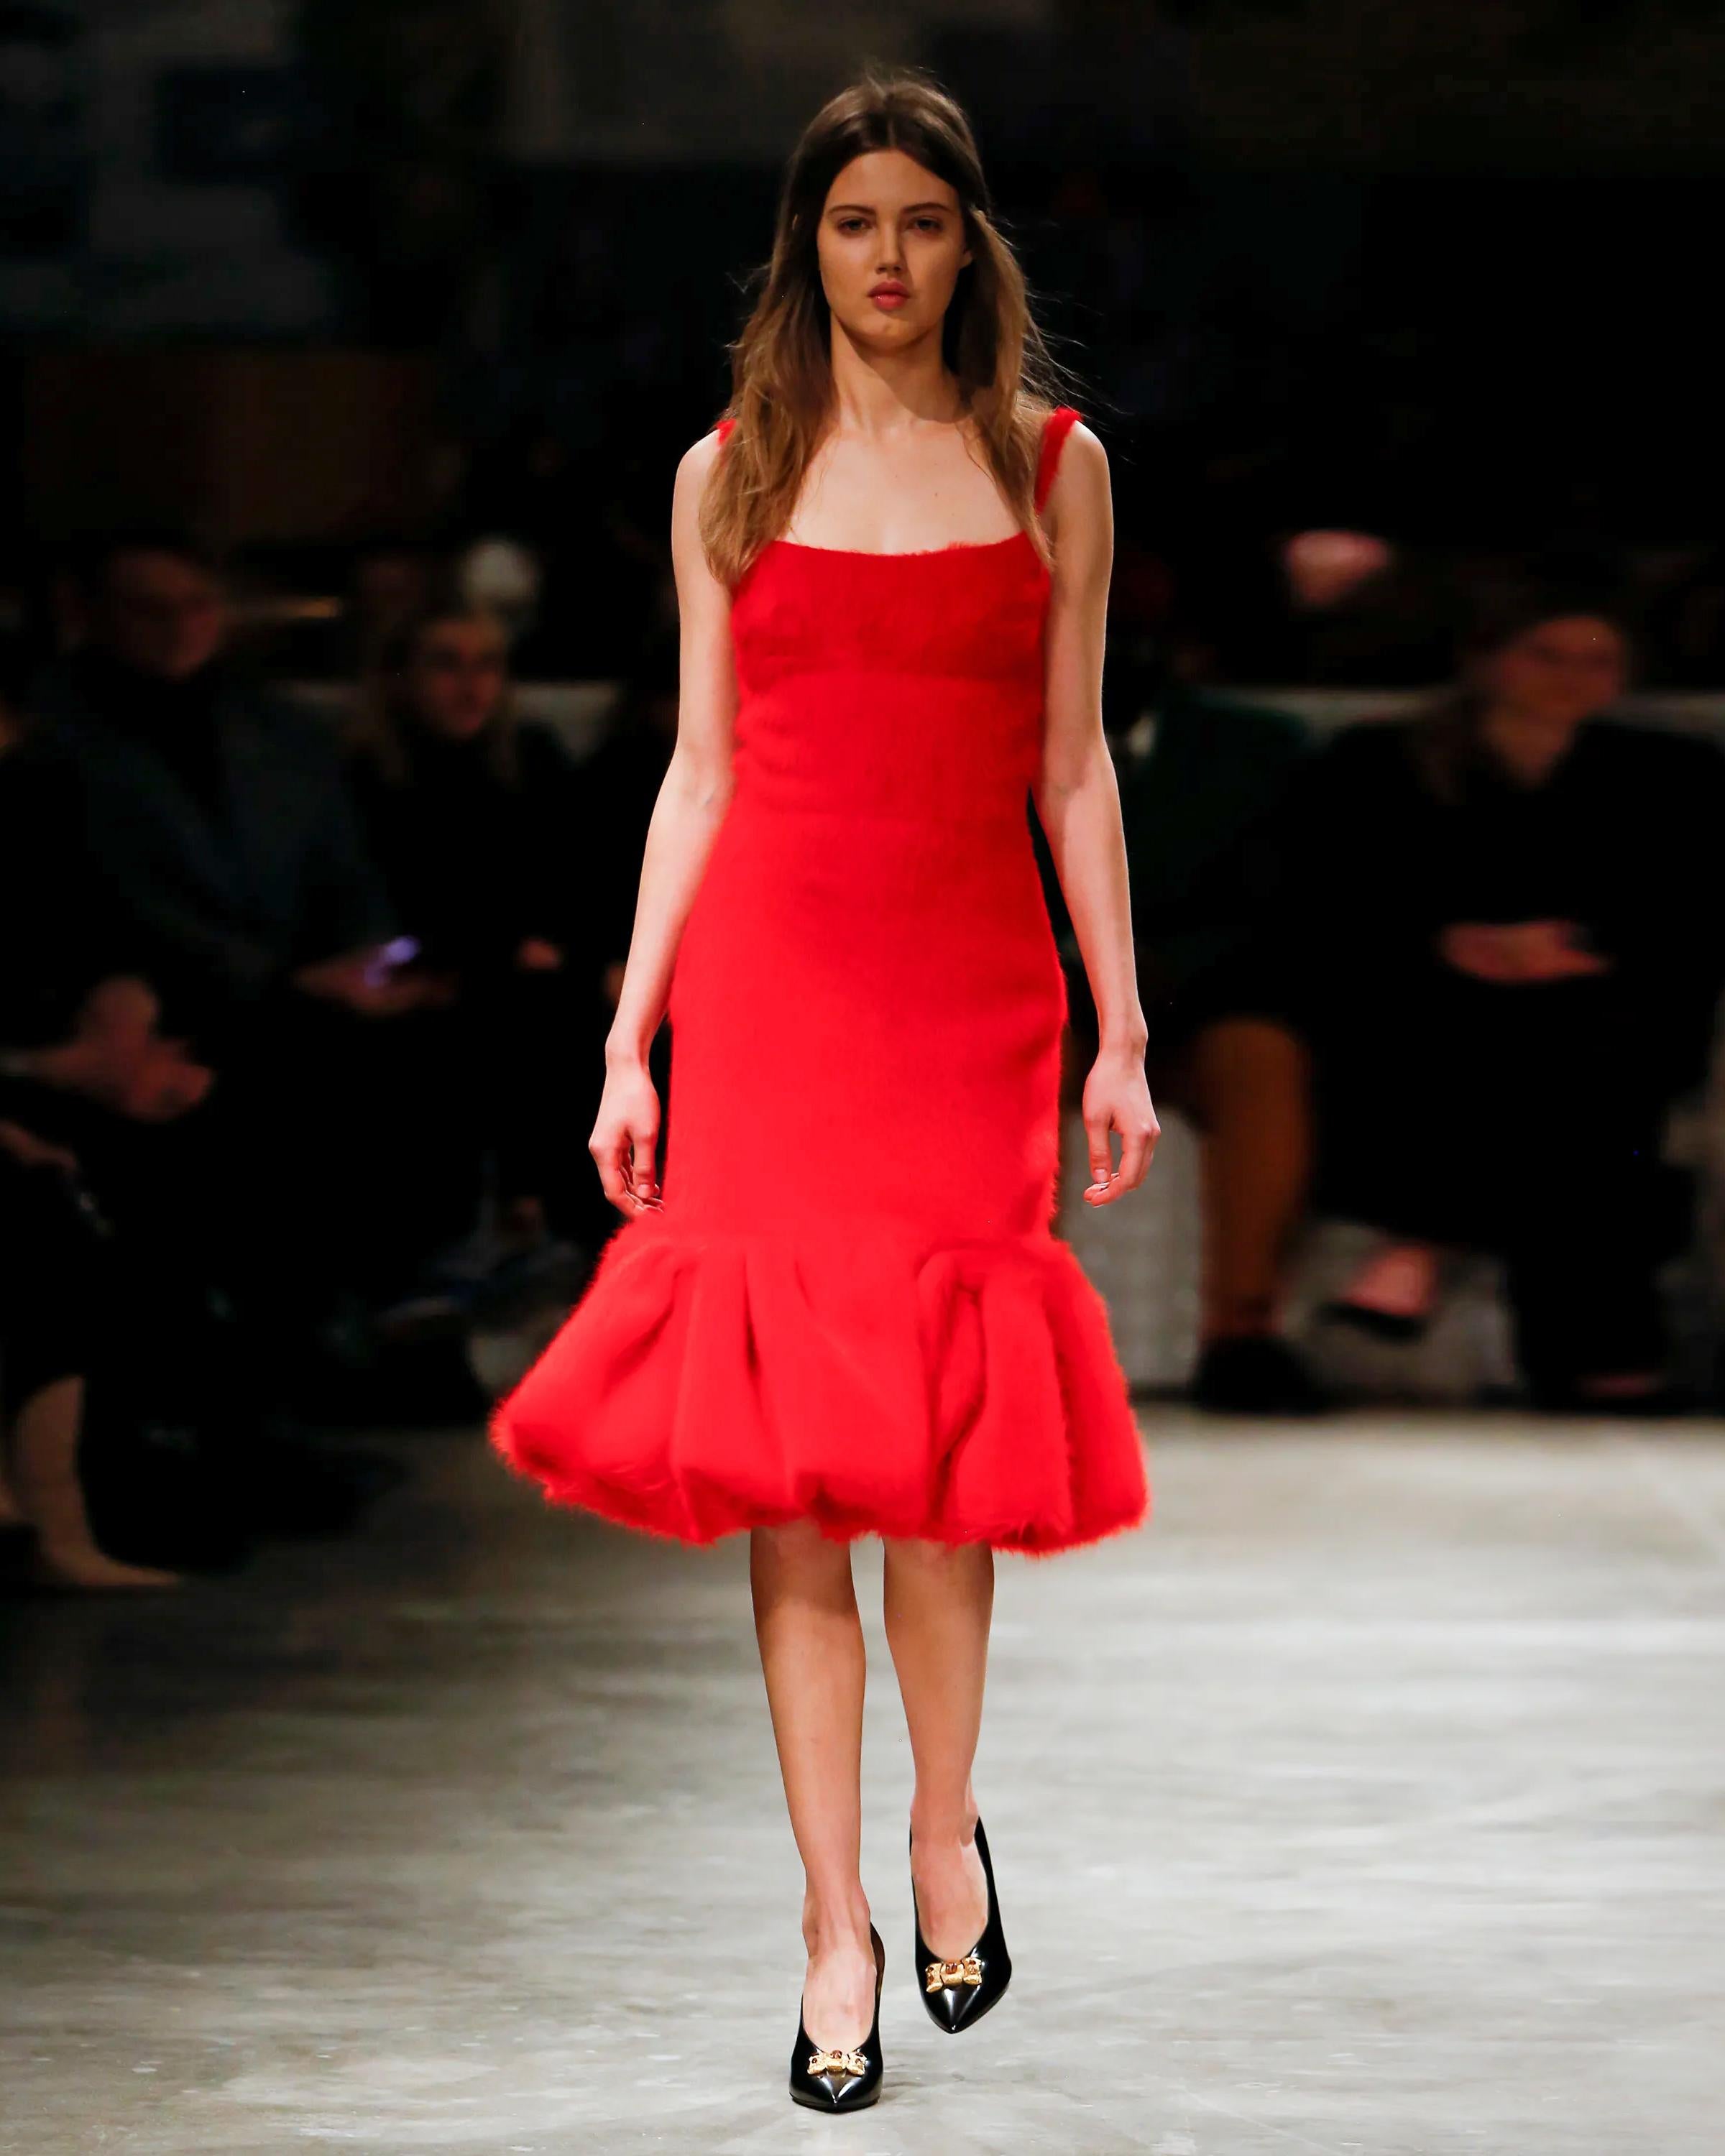 ▪ Runway Prada Red Cocktail Dress
▪ Creative Director: Miuccia Prada
▪ Fall-Winter 2017
▪ Crafted from plush red brushed alpaca silk, boasting a luxuriously fuzzy texture
▪ Tailored bodice features a classic square neckline
▪ The skirt descends to